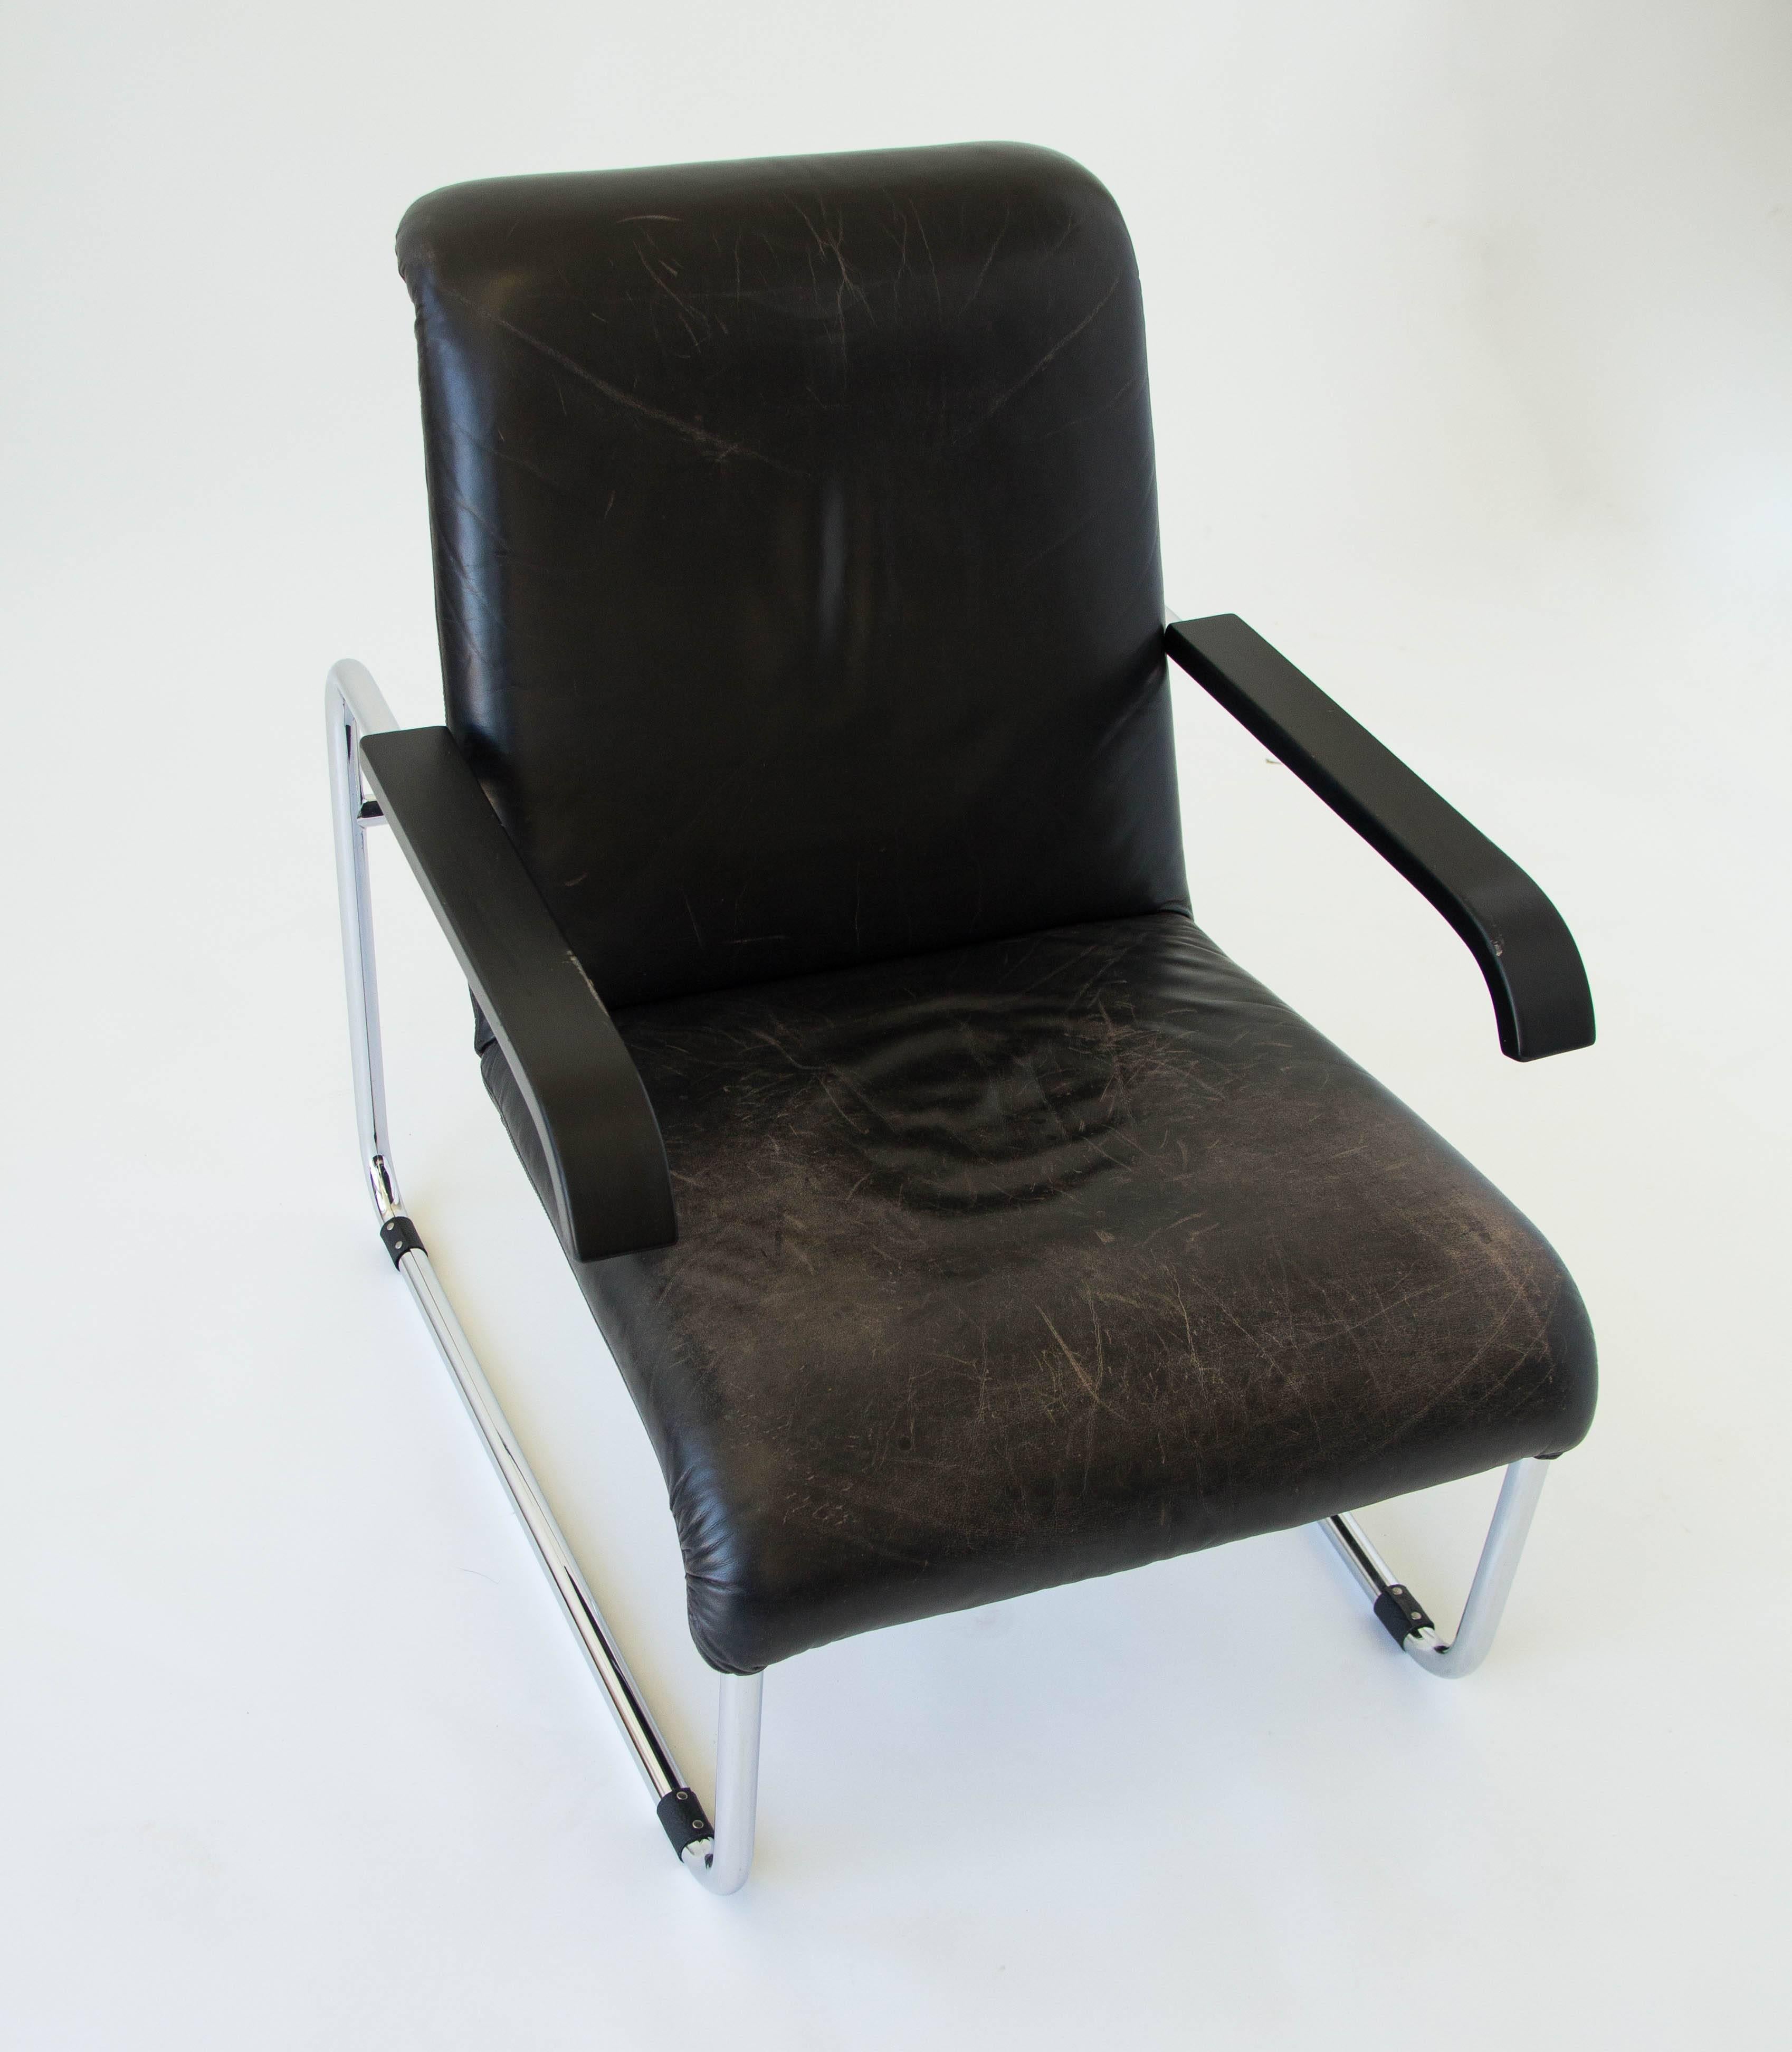 An original Marcel Breuer B35 lounge chair in black leather with painted wooden armrests. Designed in 1928 and produced by German manufacturer Thonet, this example has a foam padding. Other variants have included cane or sling upholstery. The chair